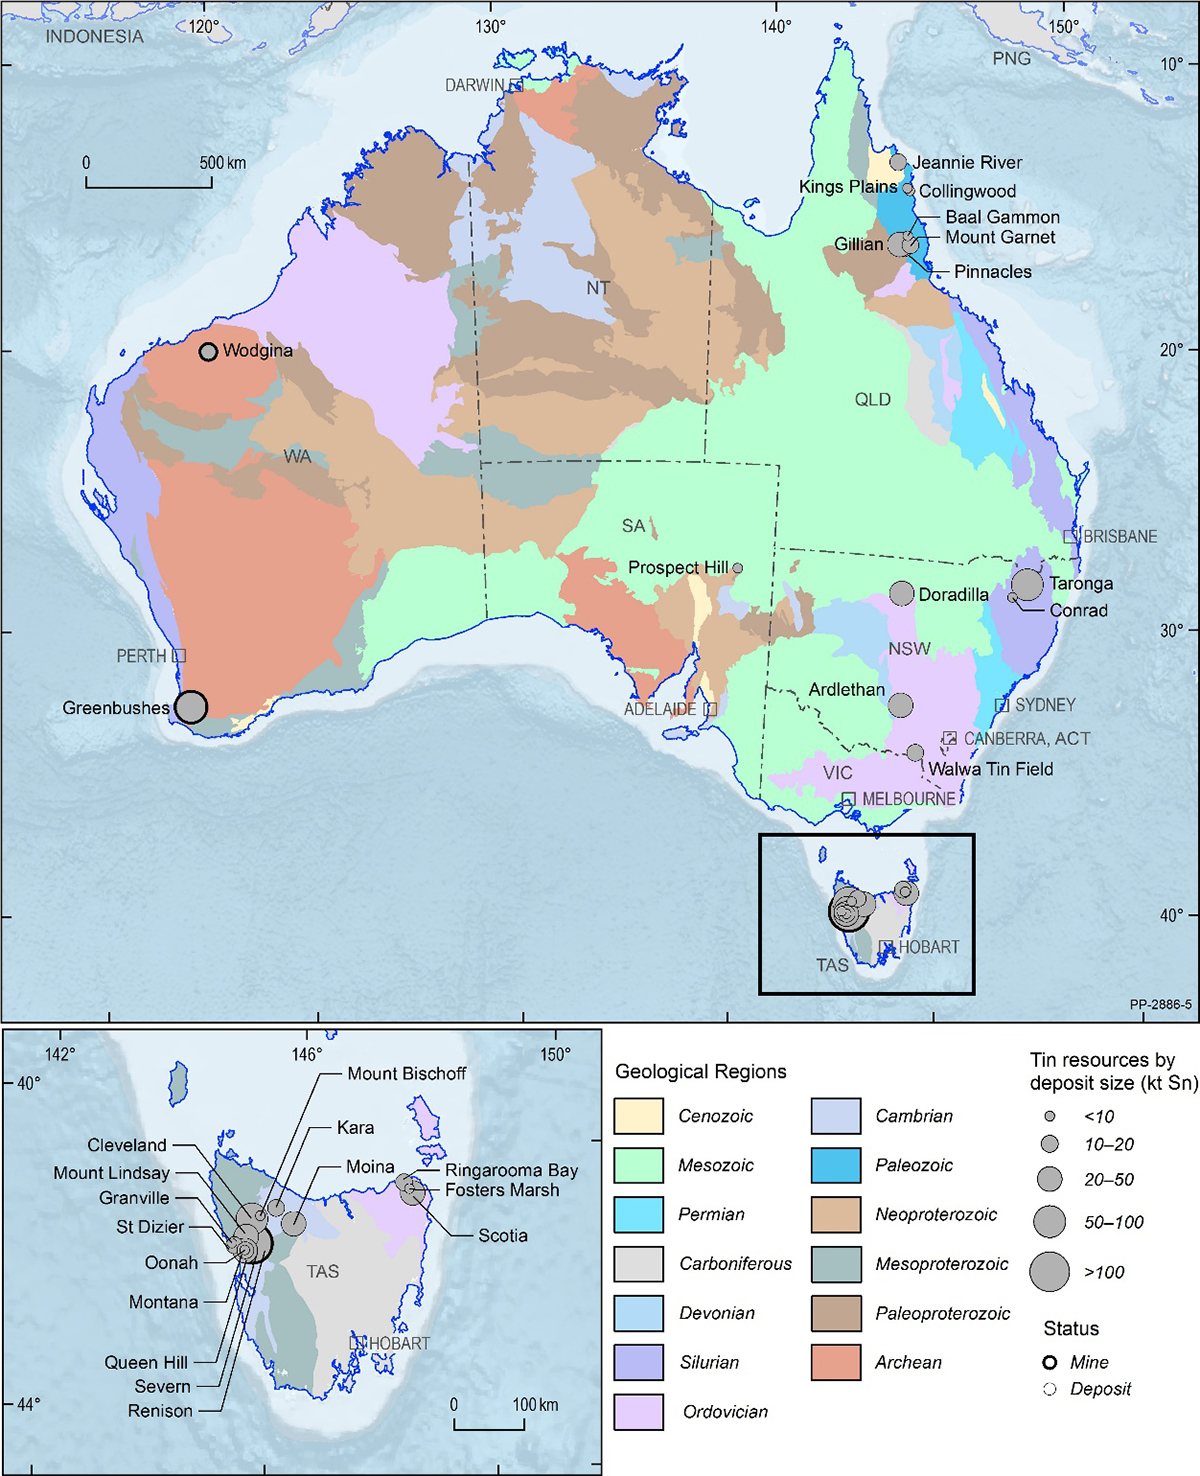 This figure is a map of Australia showing the basic geological regions, location and size of tin deposits. For further details please email Geoscience Australia at clientservices@ga.gov.au.